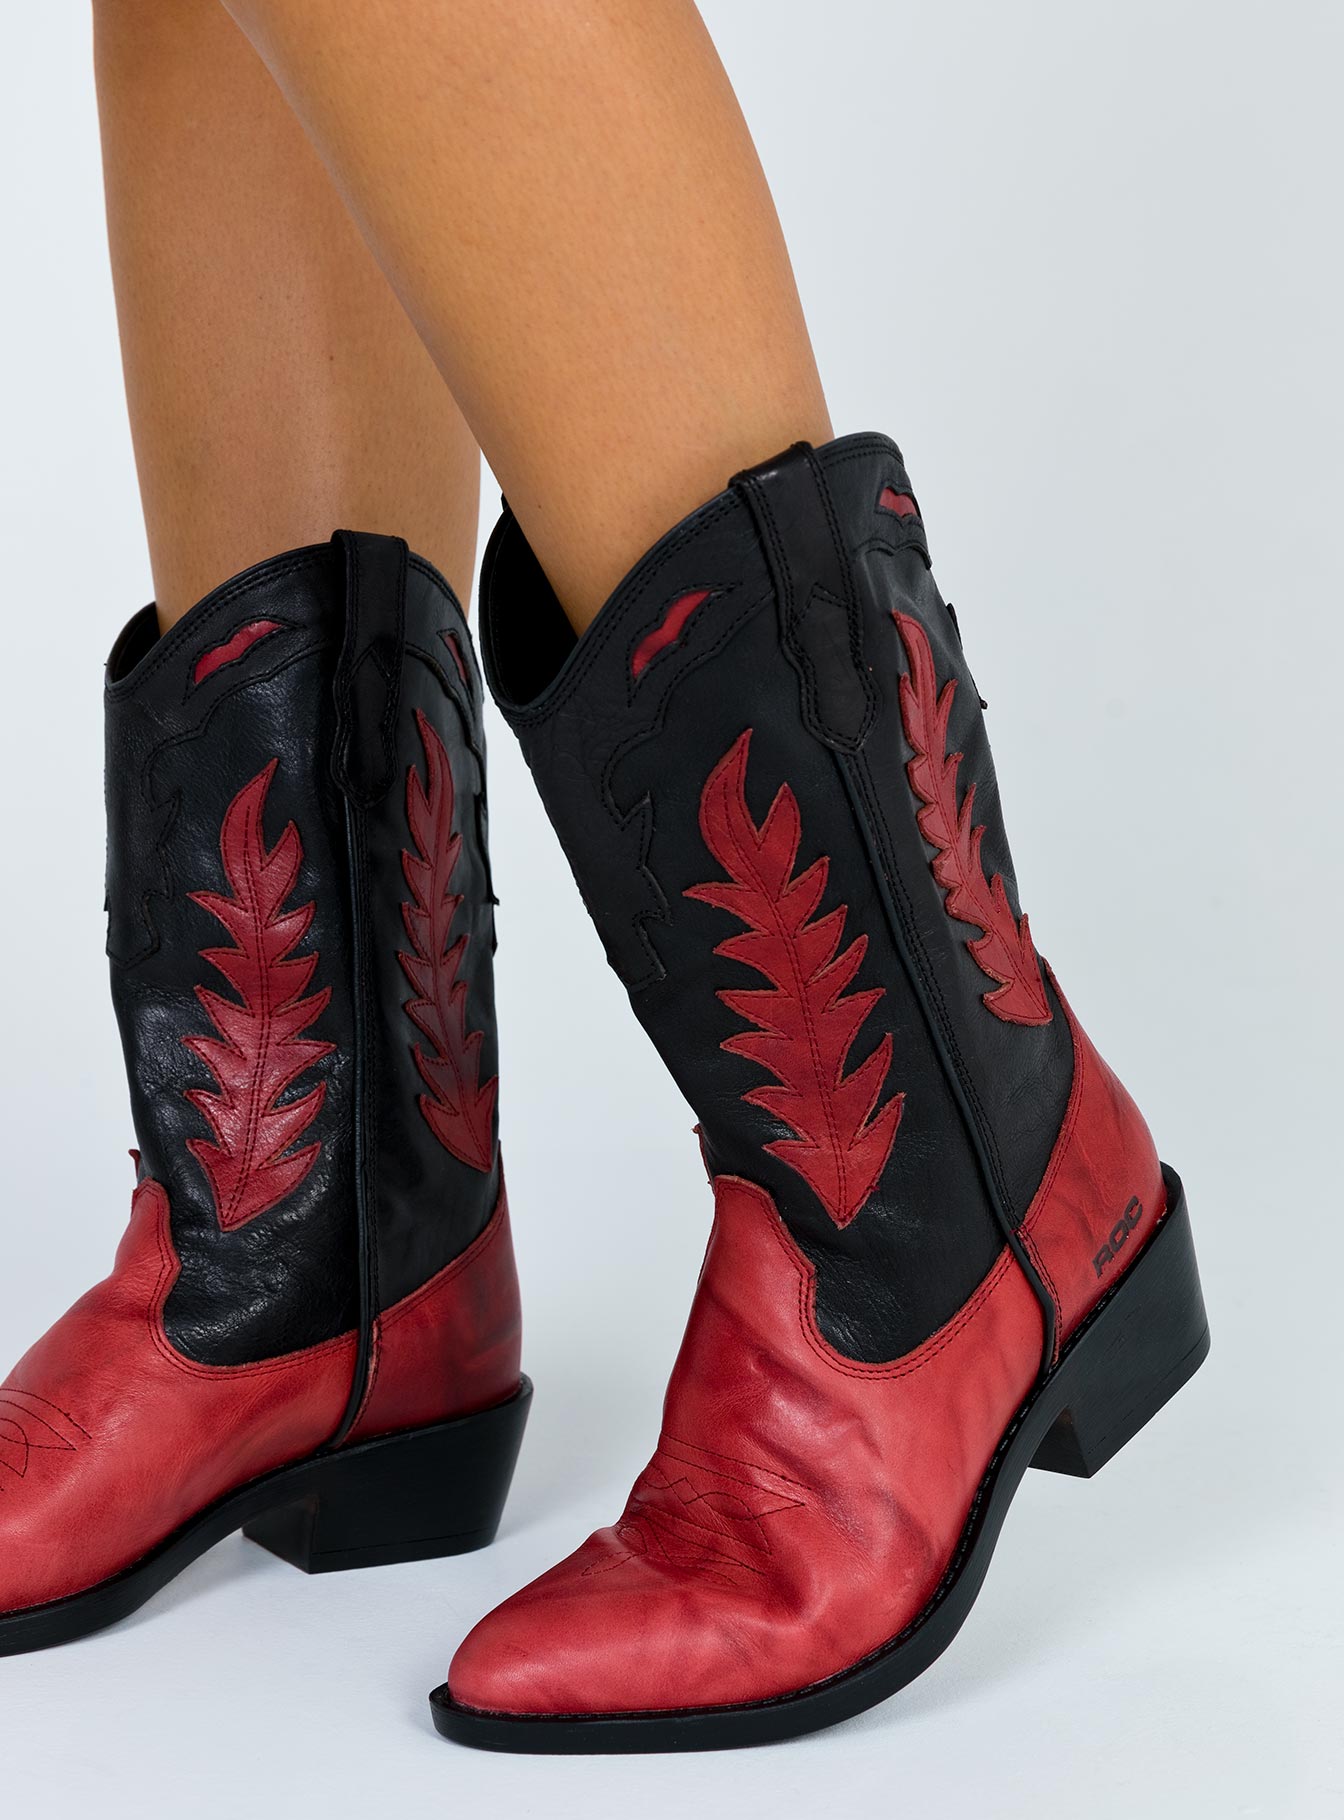 Roc Boots Australia India Boots Red 